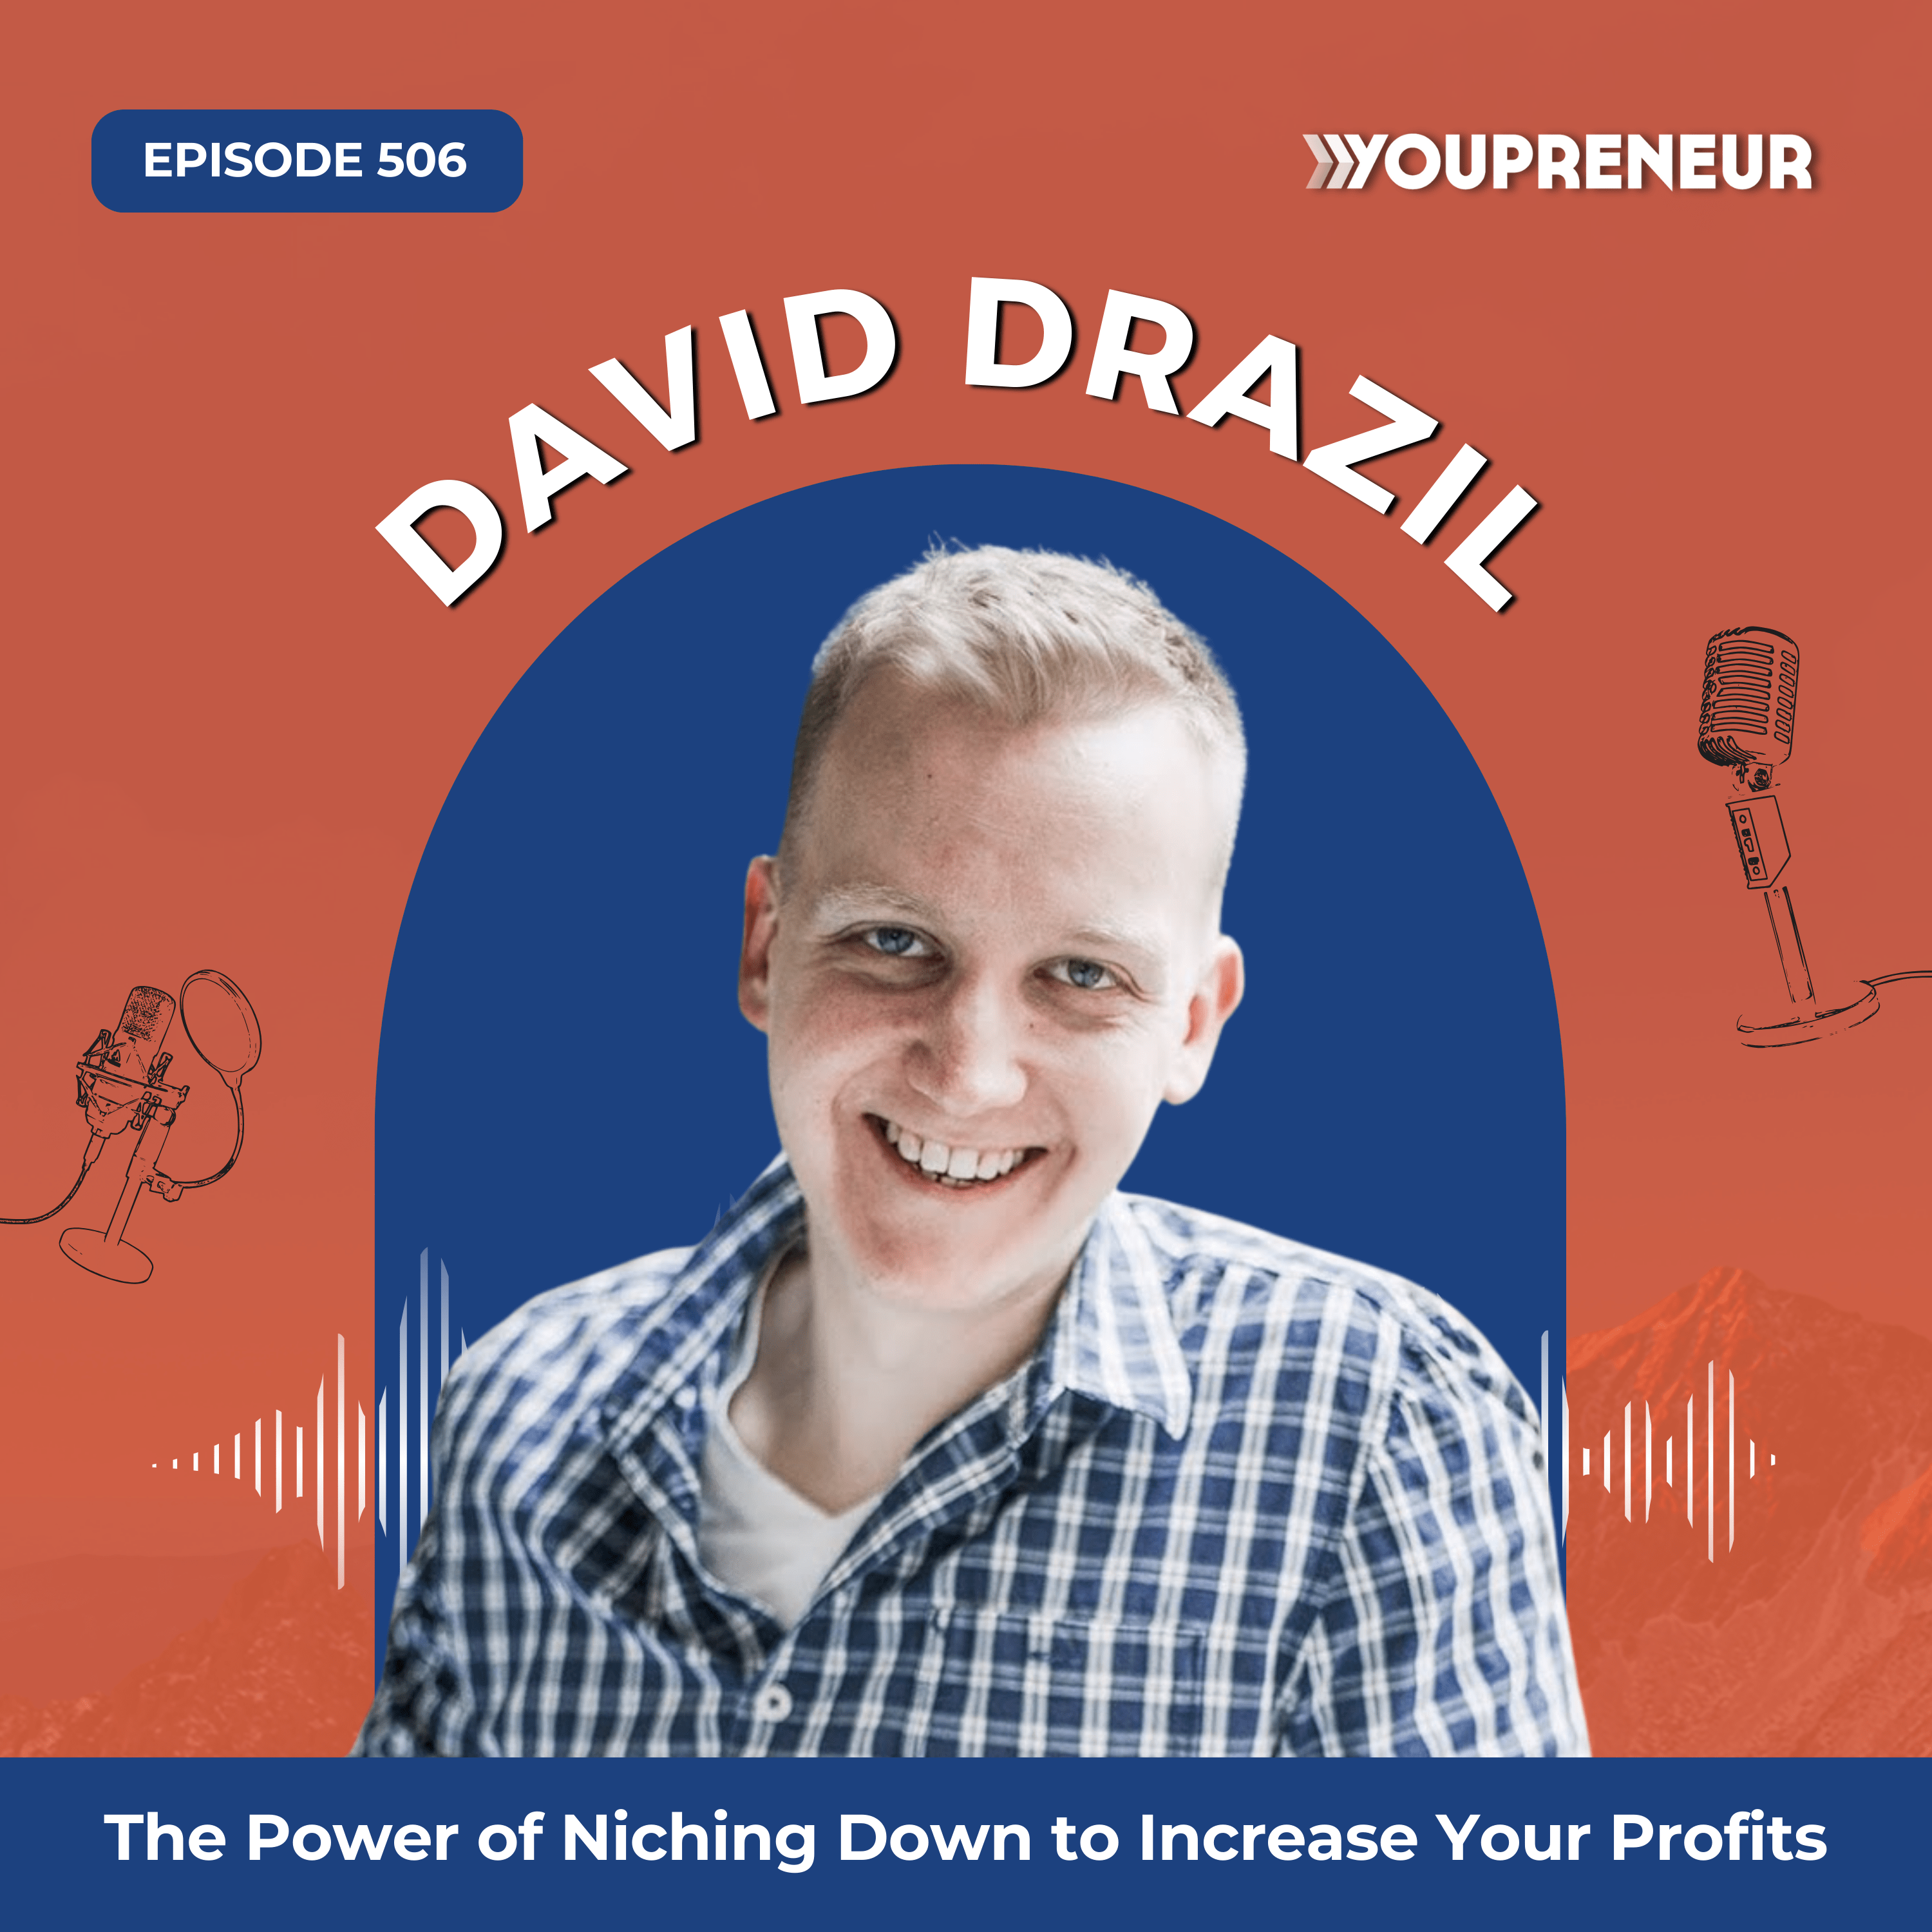 The Power of Niching Down to Increase Your Profits with David Drazil